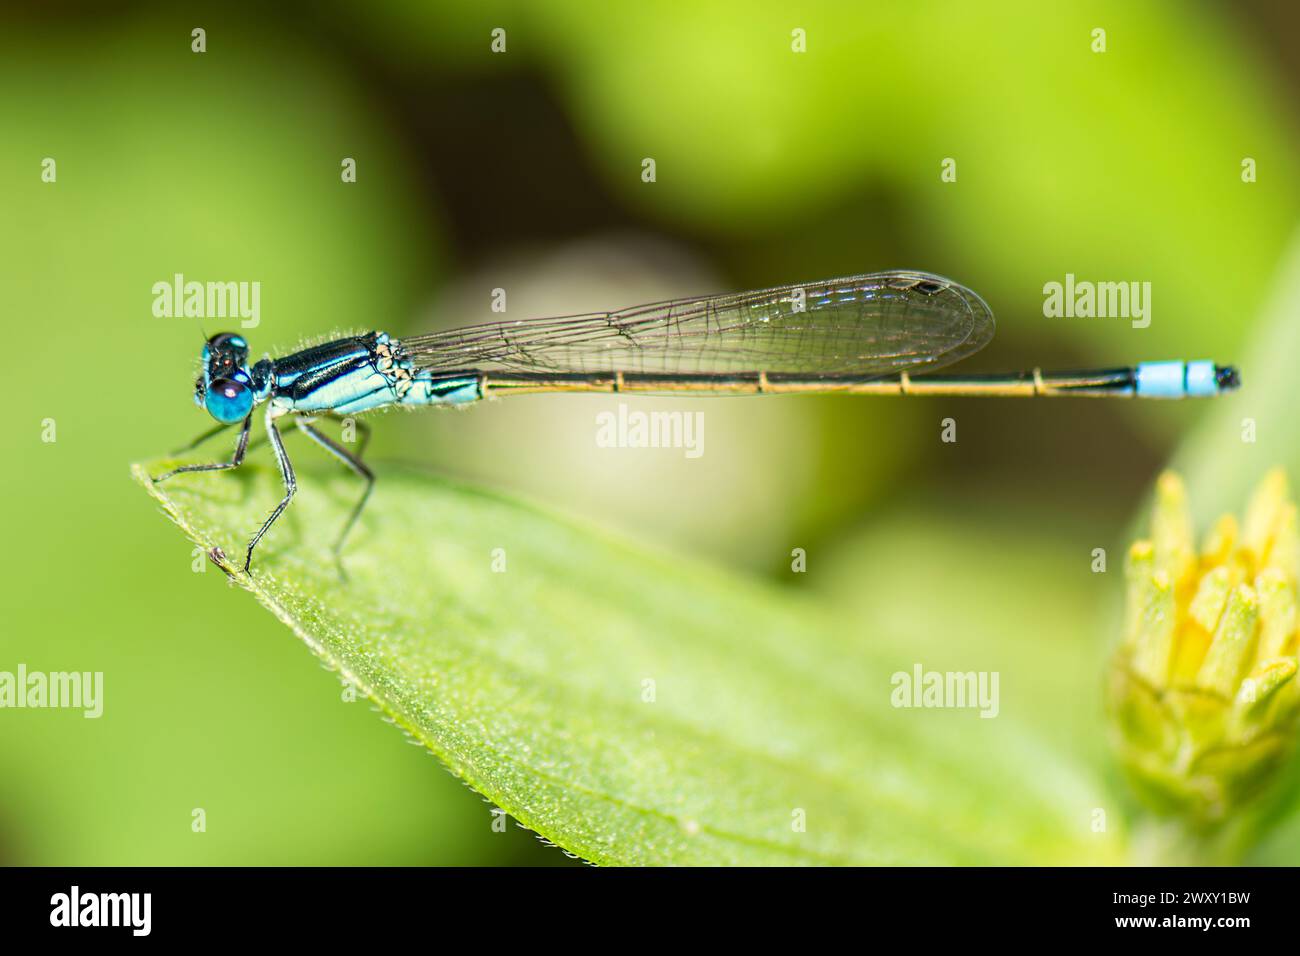 Common Marsh Damselfly with the scientific name of Homeoura chelifera. The damselflies are flying insects of the suborder Zygoptera in the order Odona Stock Photo